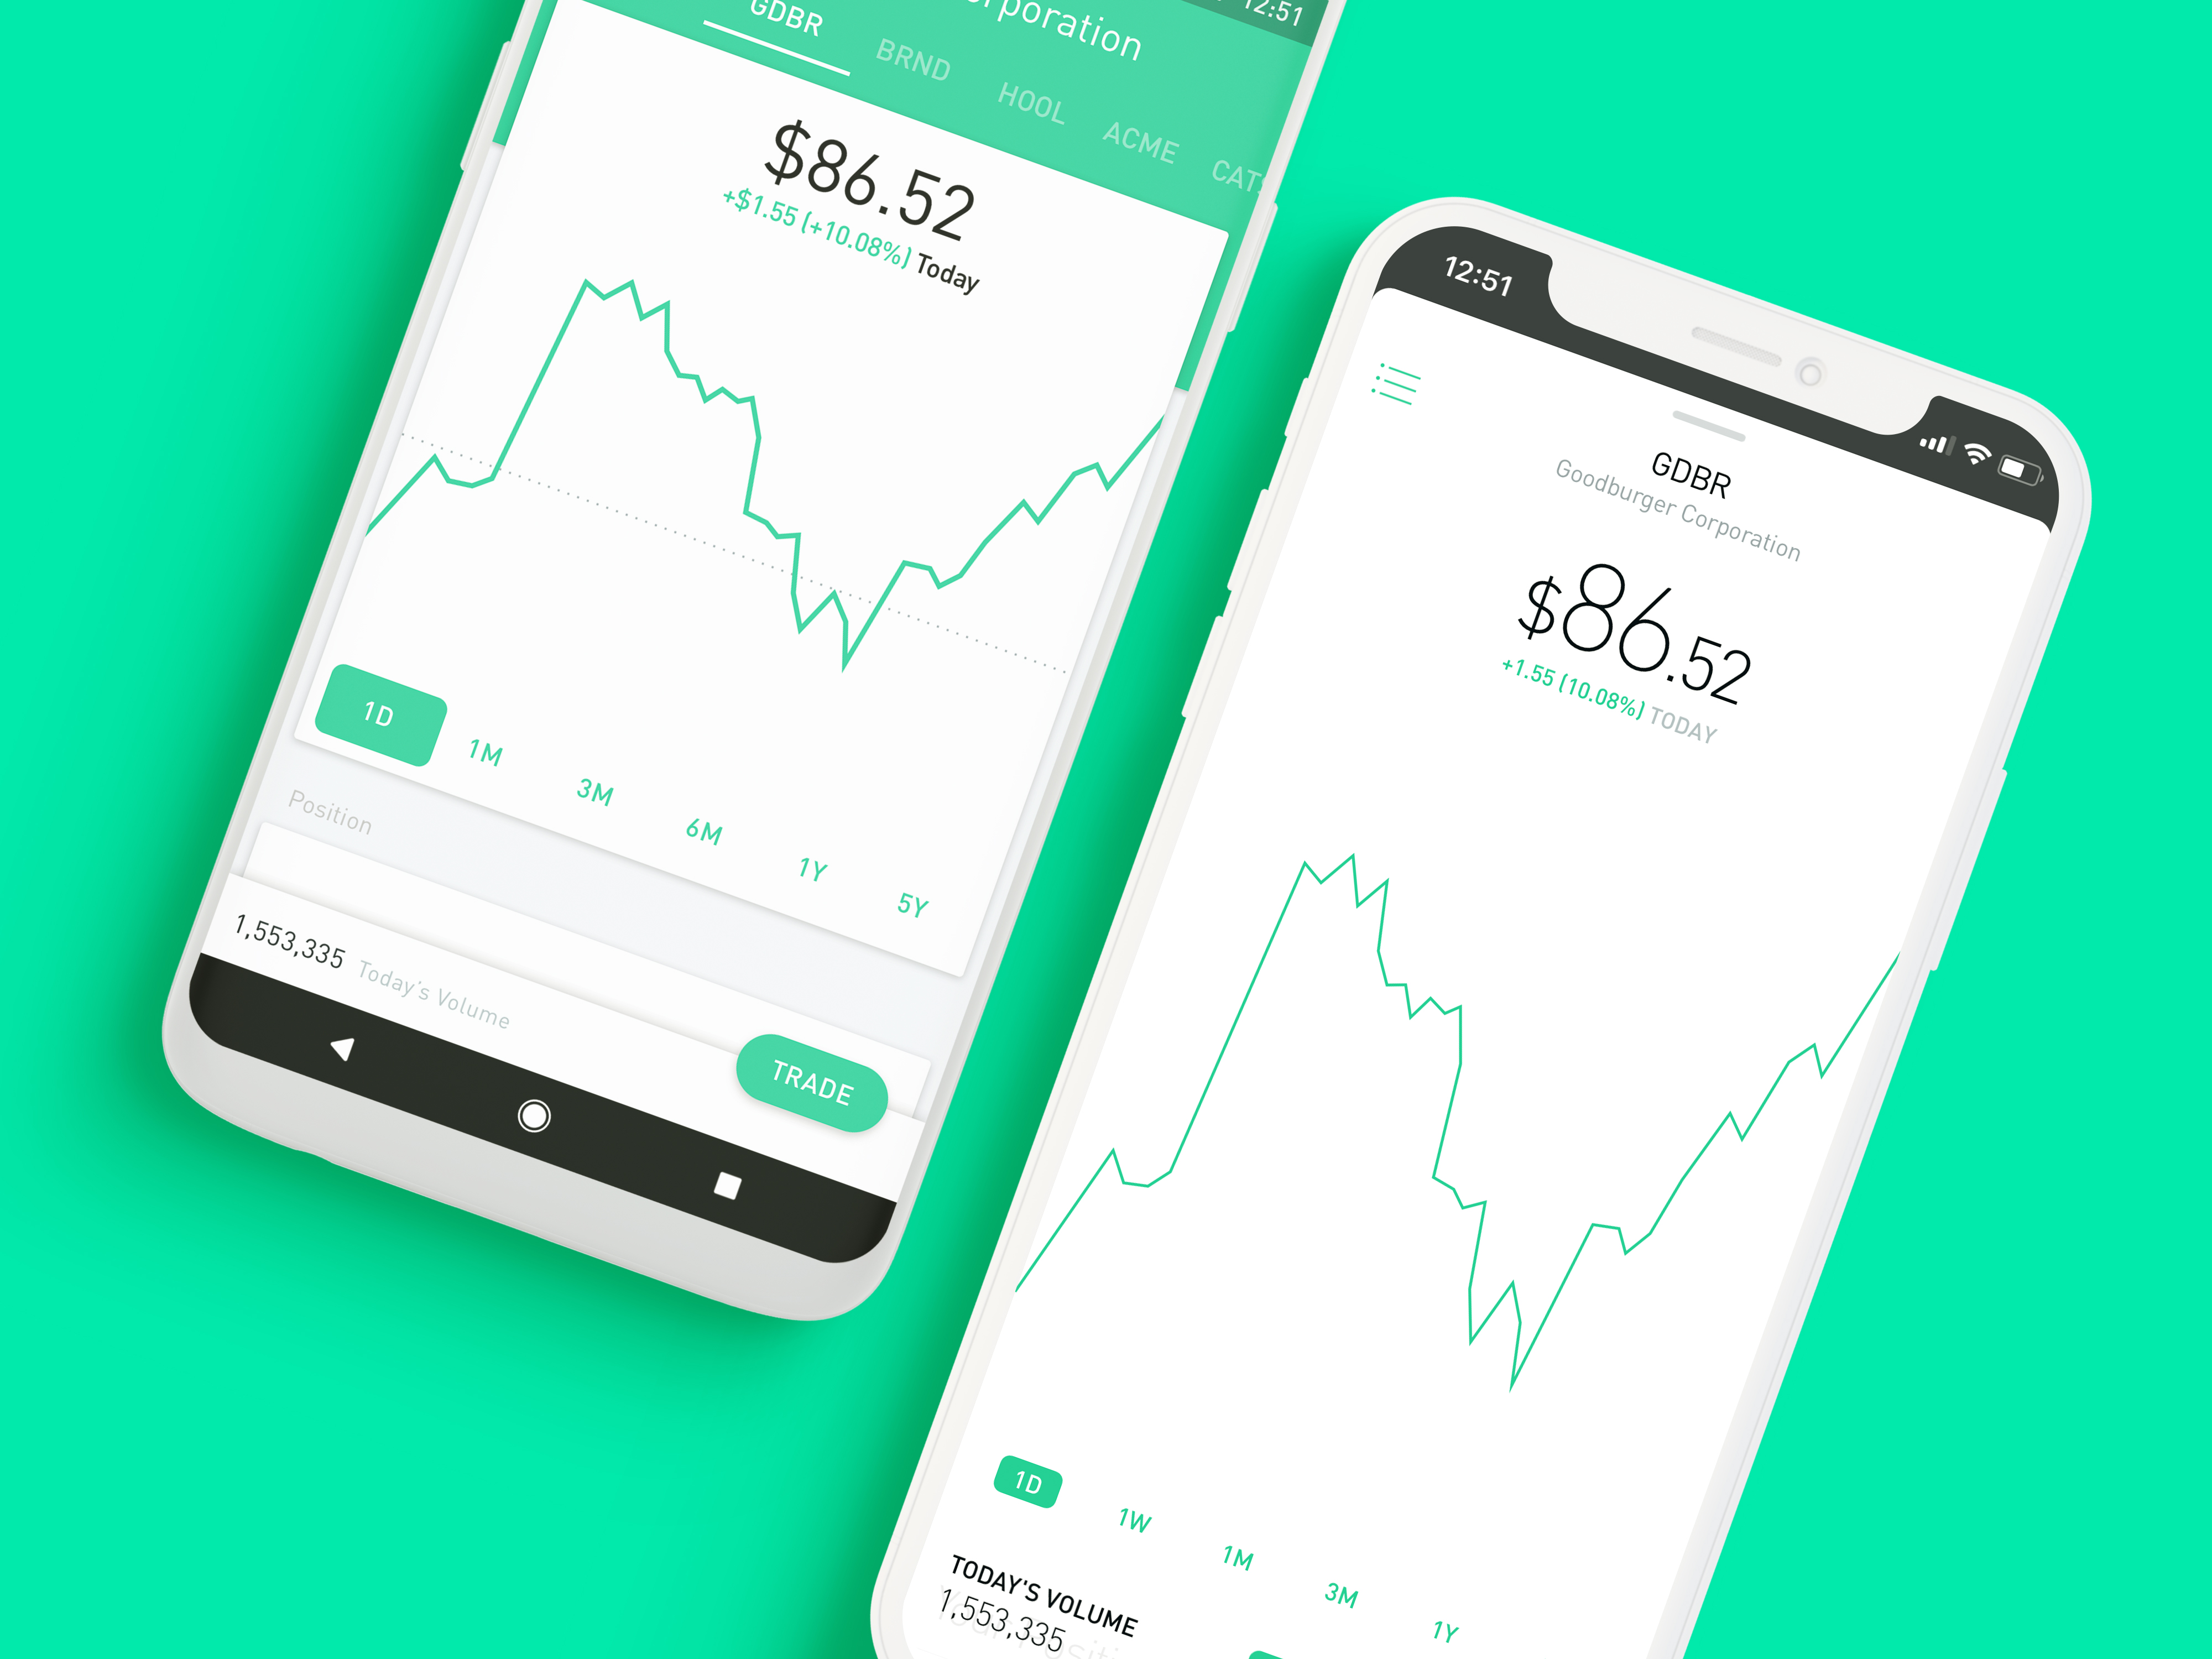 This Free Investing App Has Attracted 5 Million Users. Here's Why You Should Stay Away